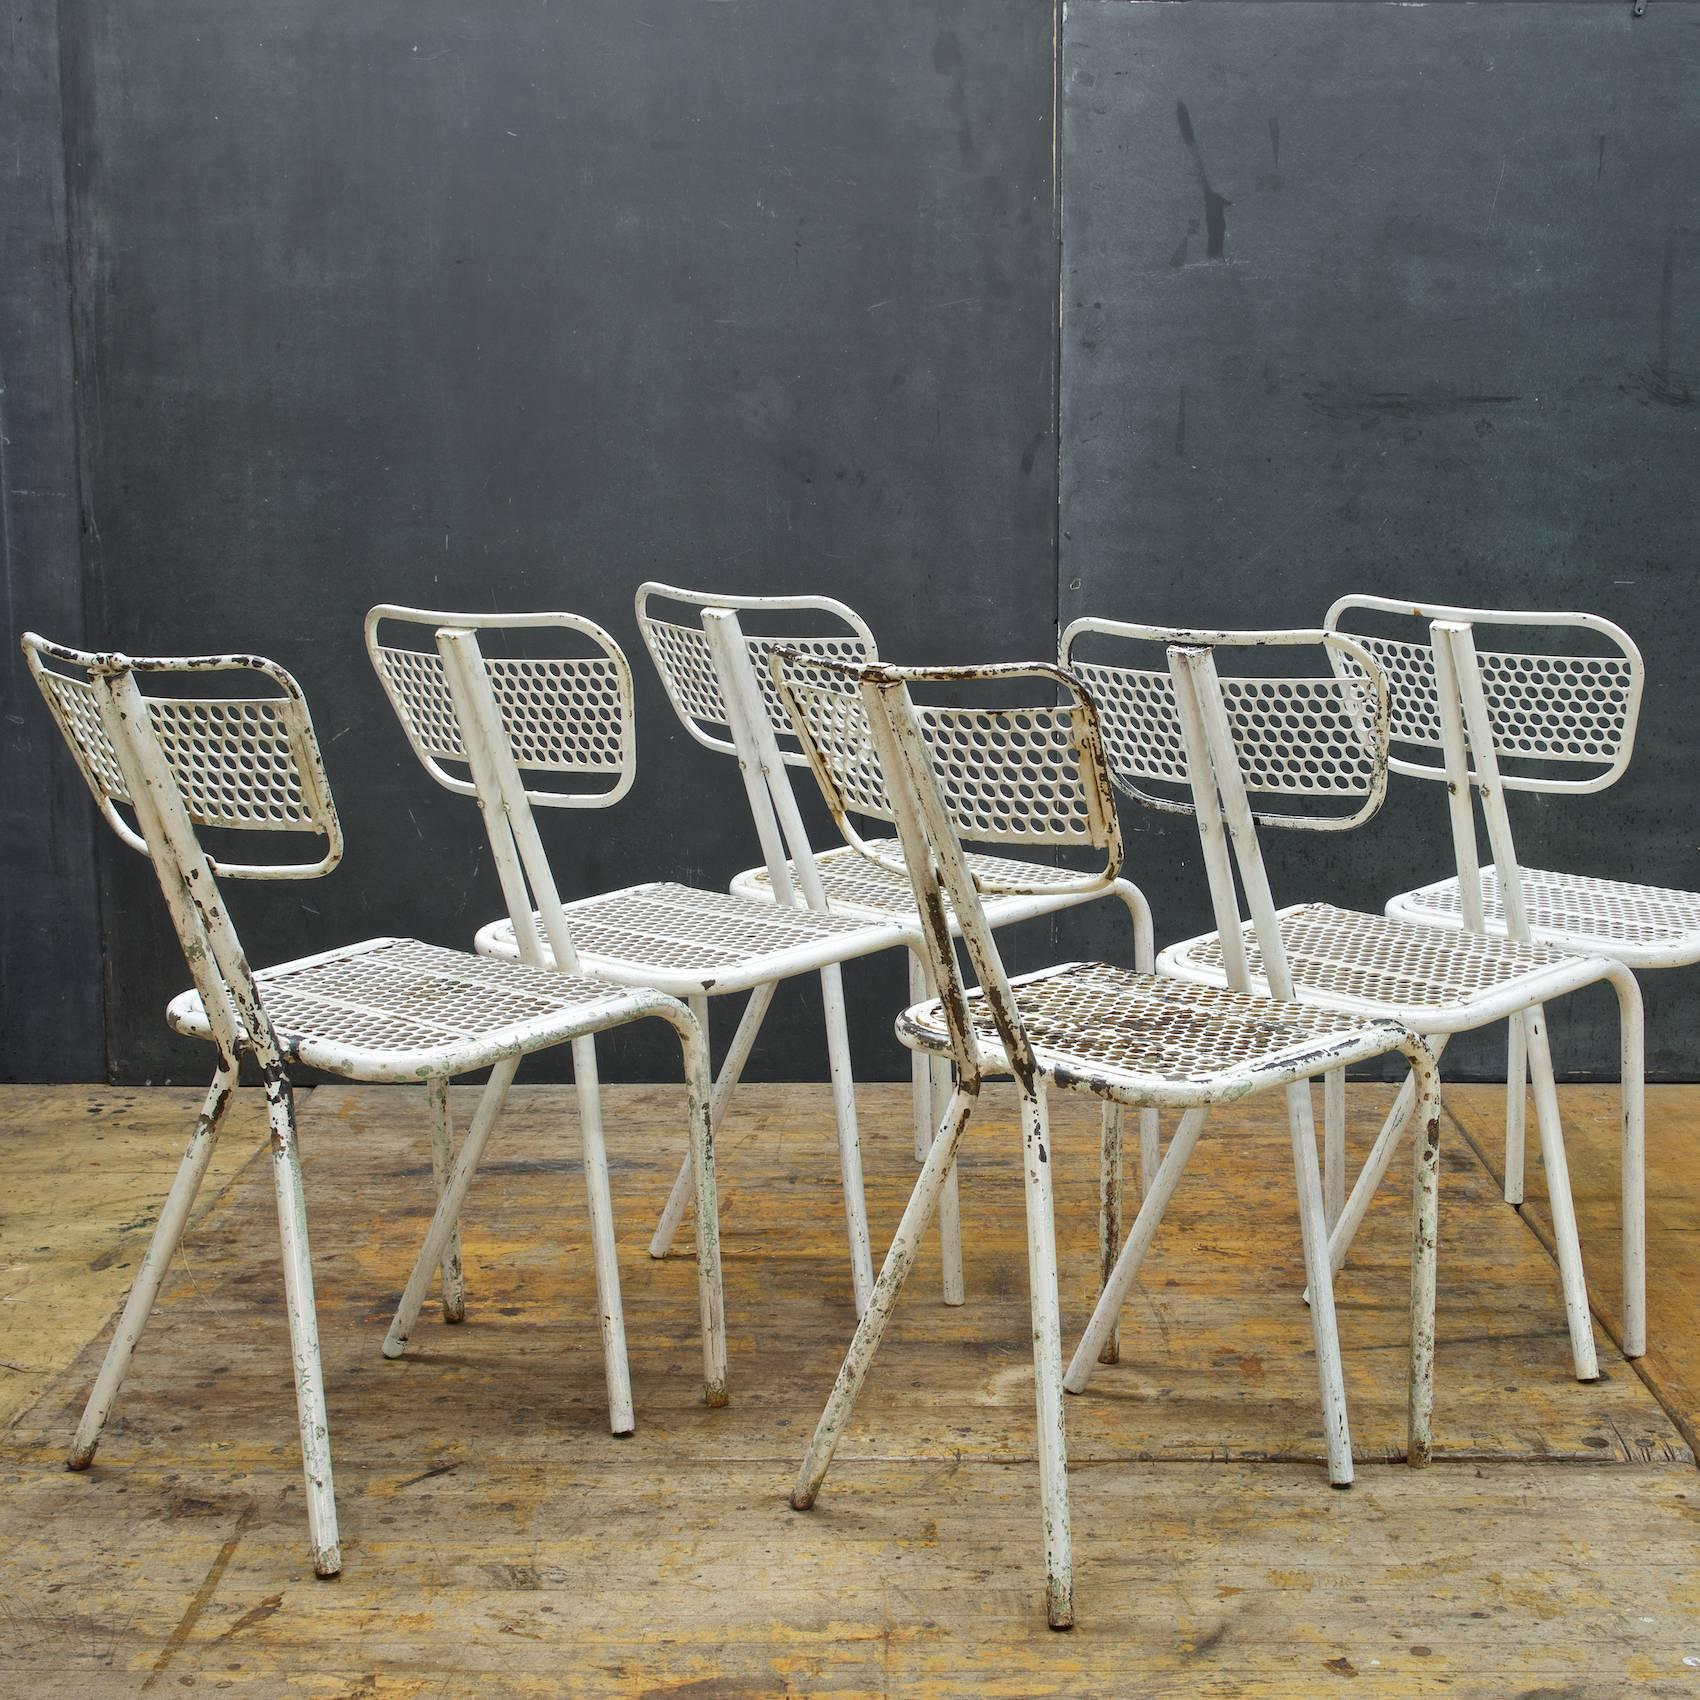 Post-war designed French Industrial/Mid-Century Modern Cafe Chairs.

